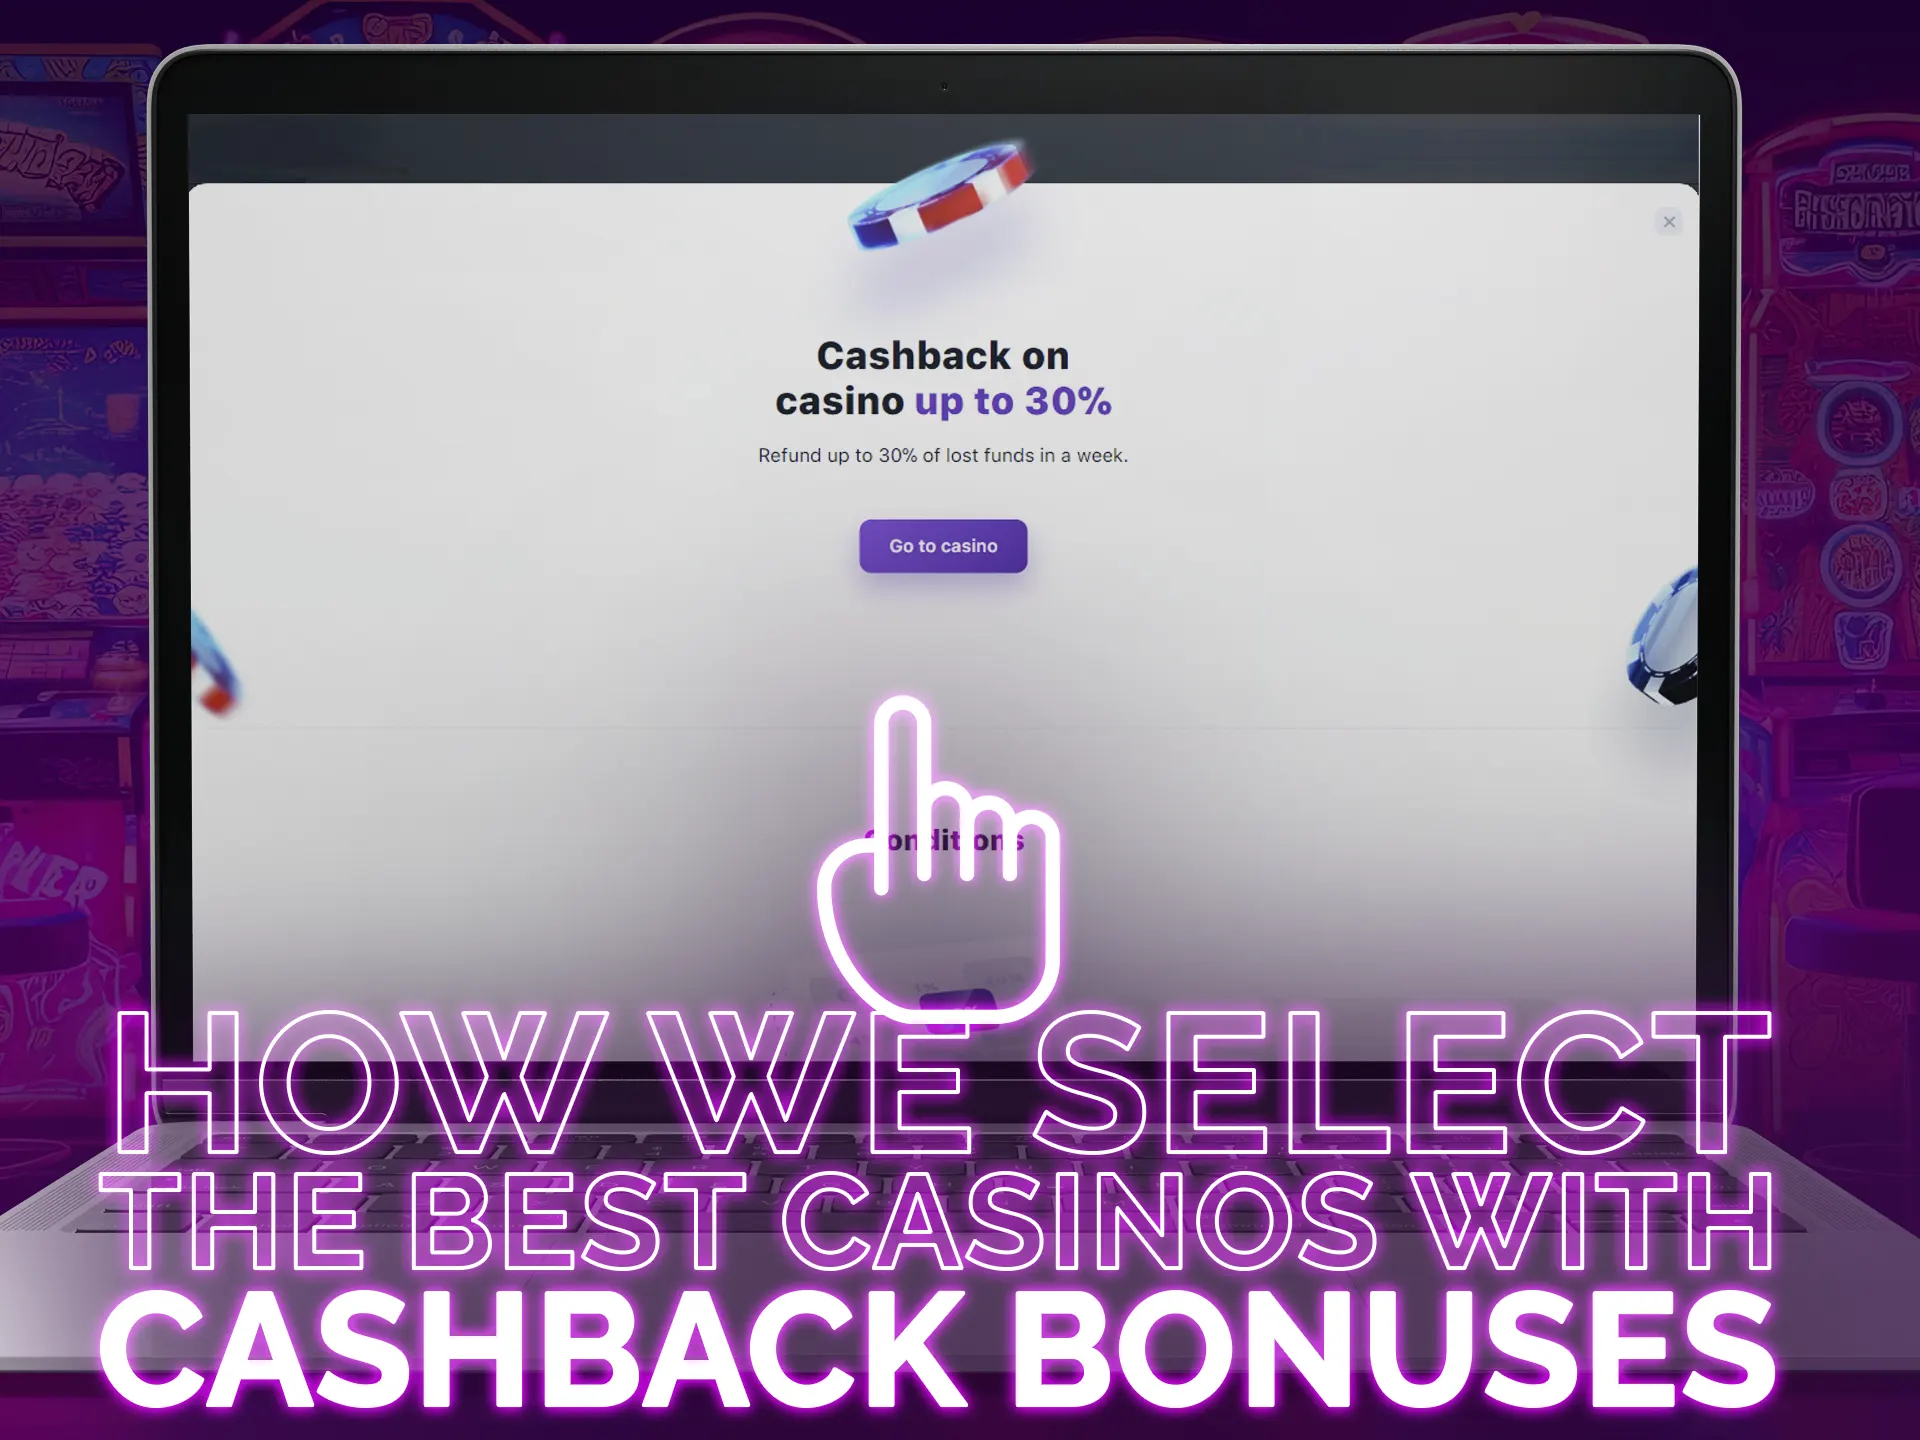 Find out the criteria of selecting our cashback bonuses.